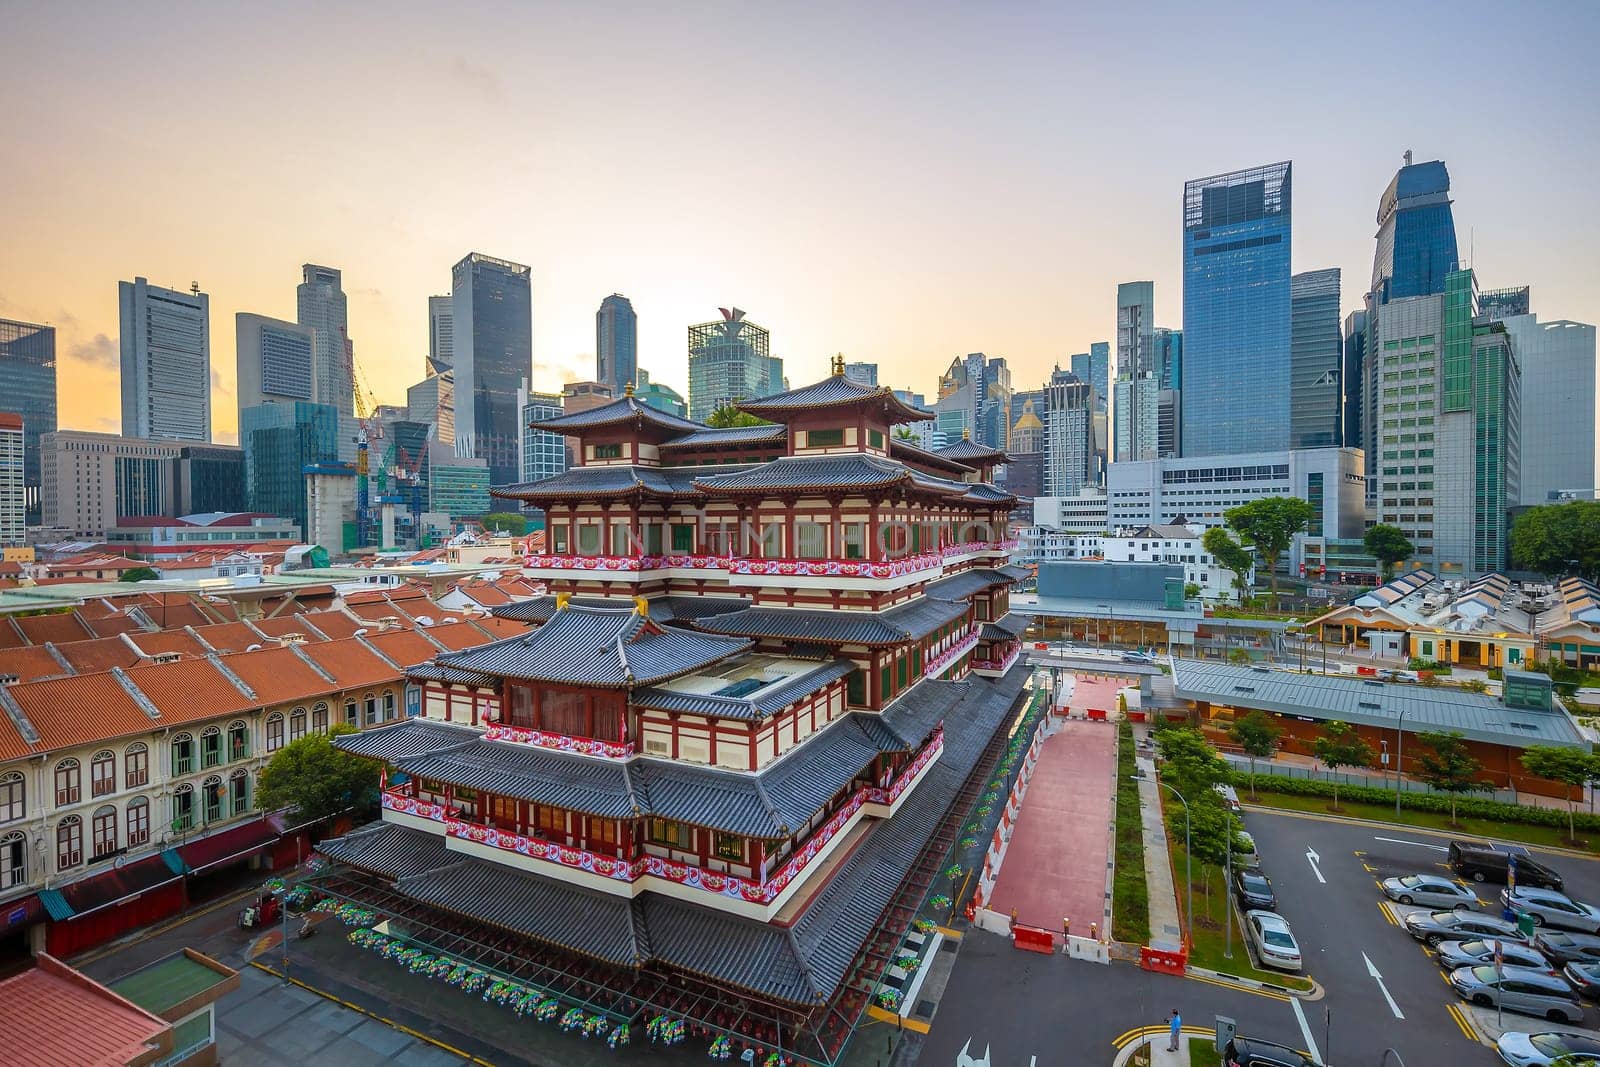 Buddha Toothe Relic Temple at Chinatown  Singapore by f11photo